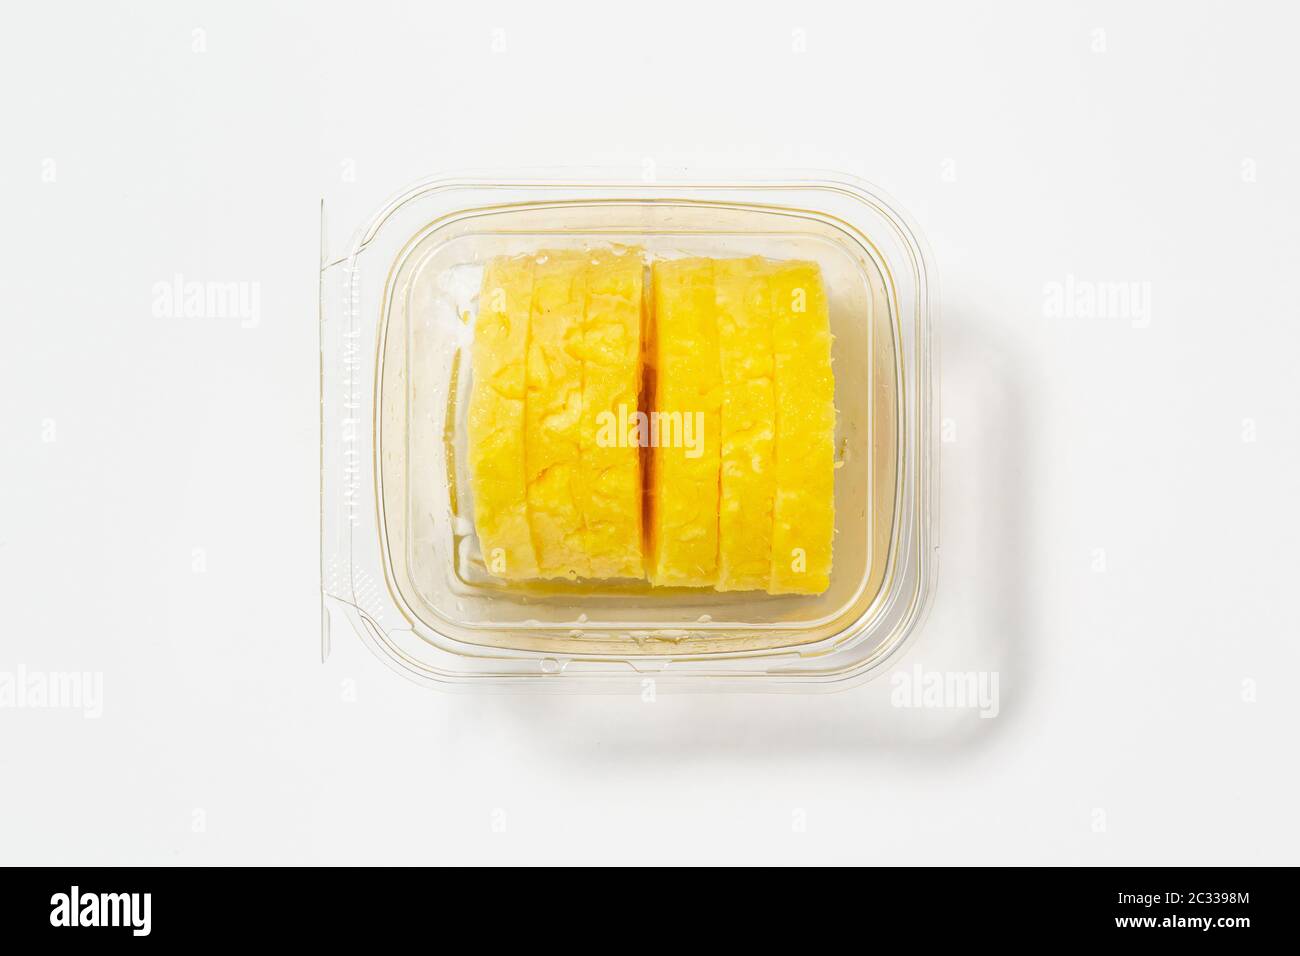 Some Ananas in plastic packaging Stock Photo